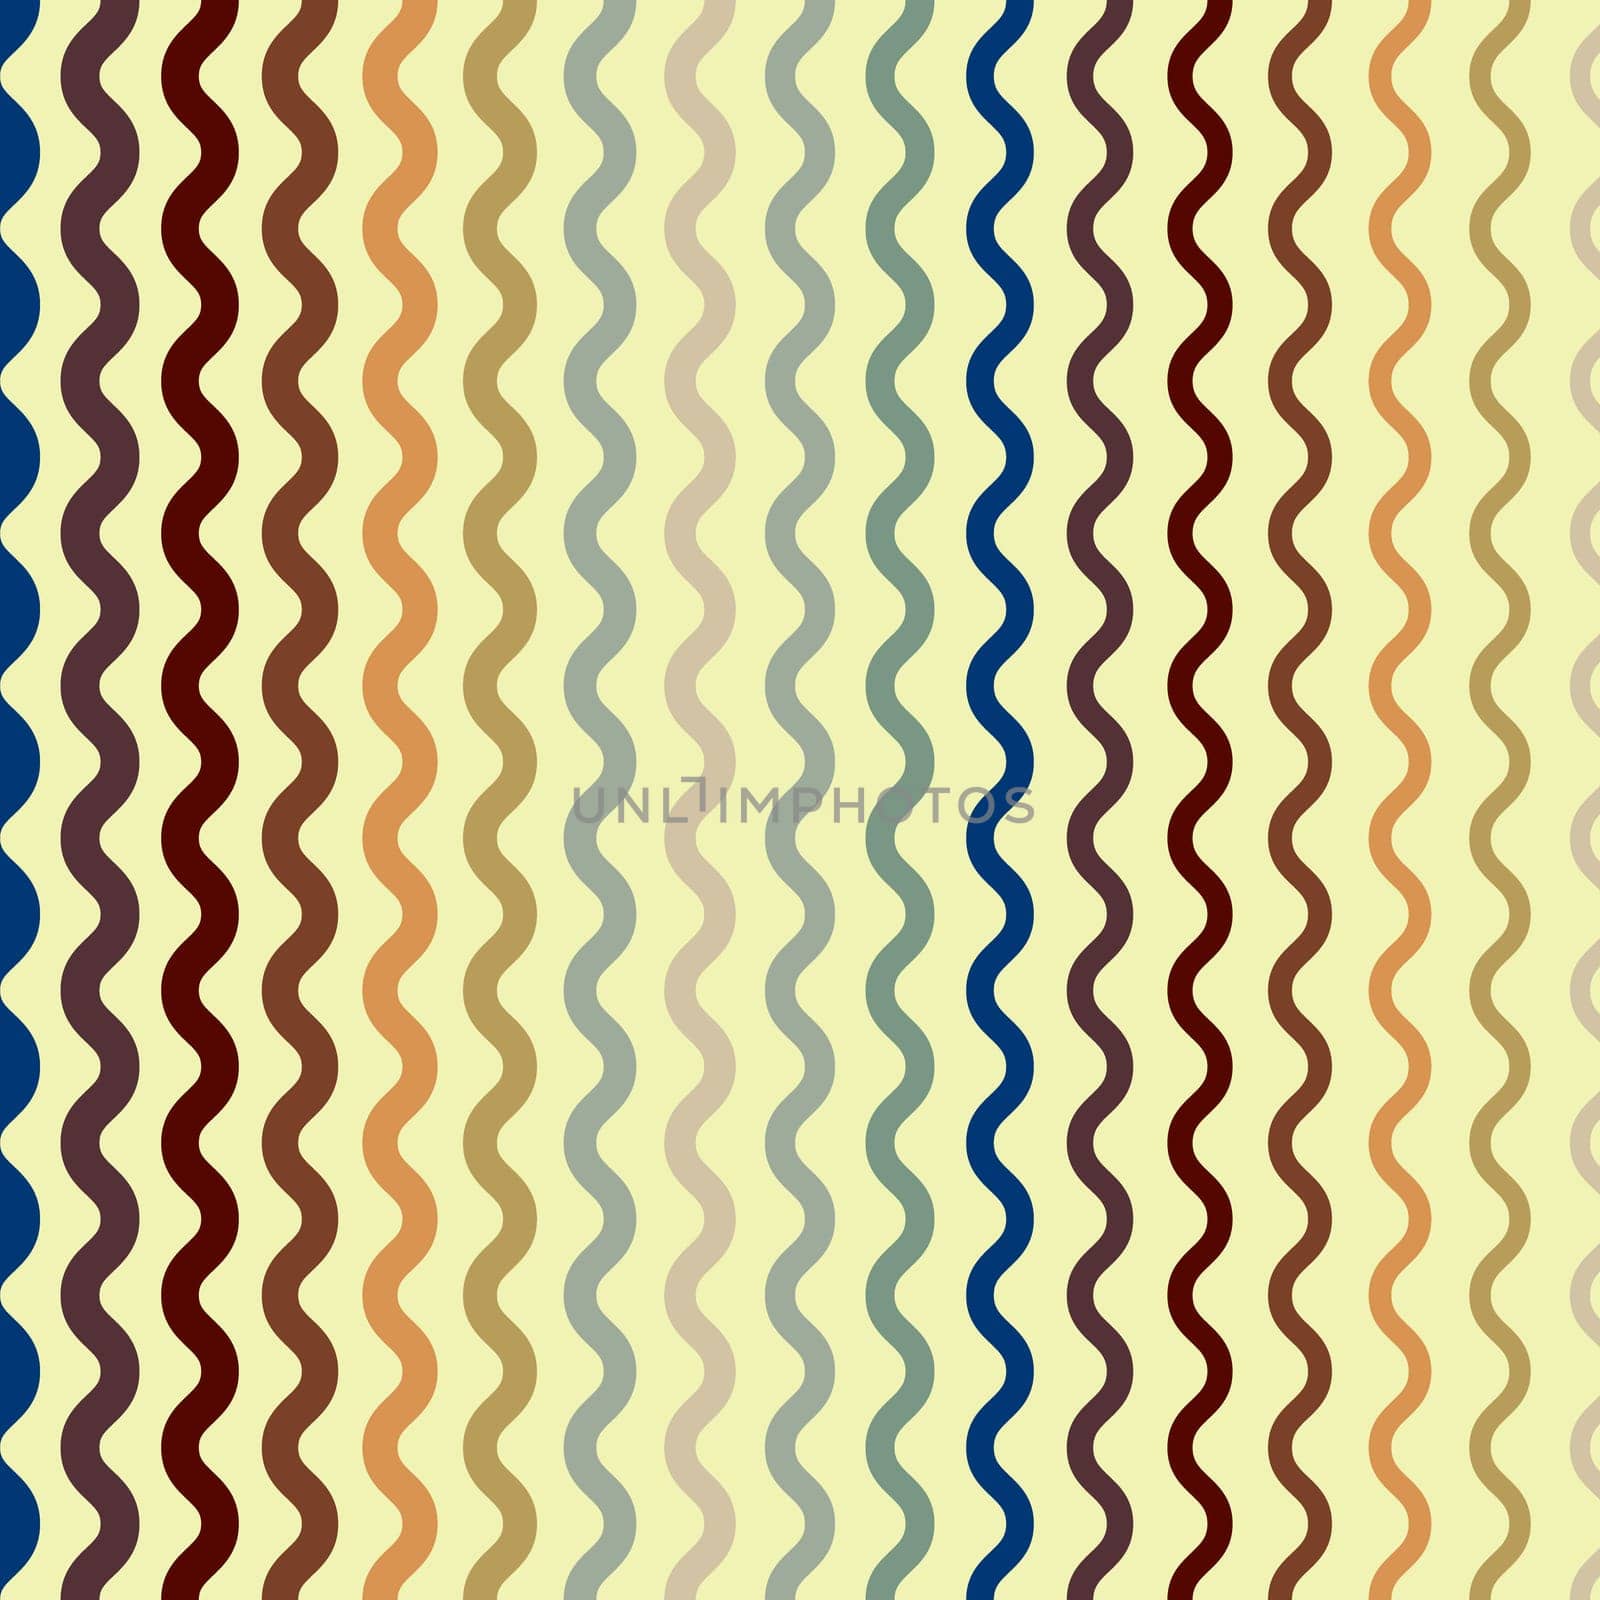 Retro groovy psychedelic wavy background by Dustick